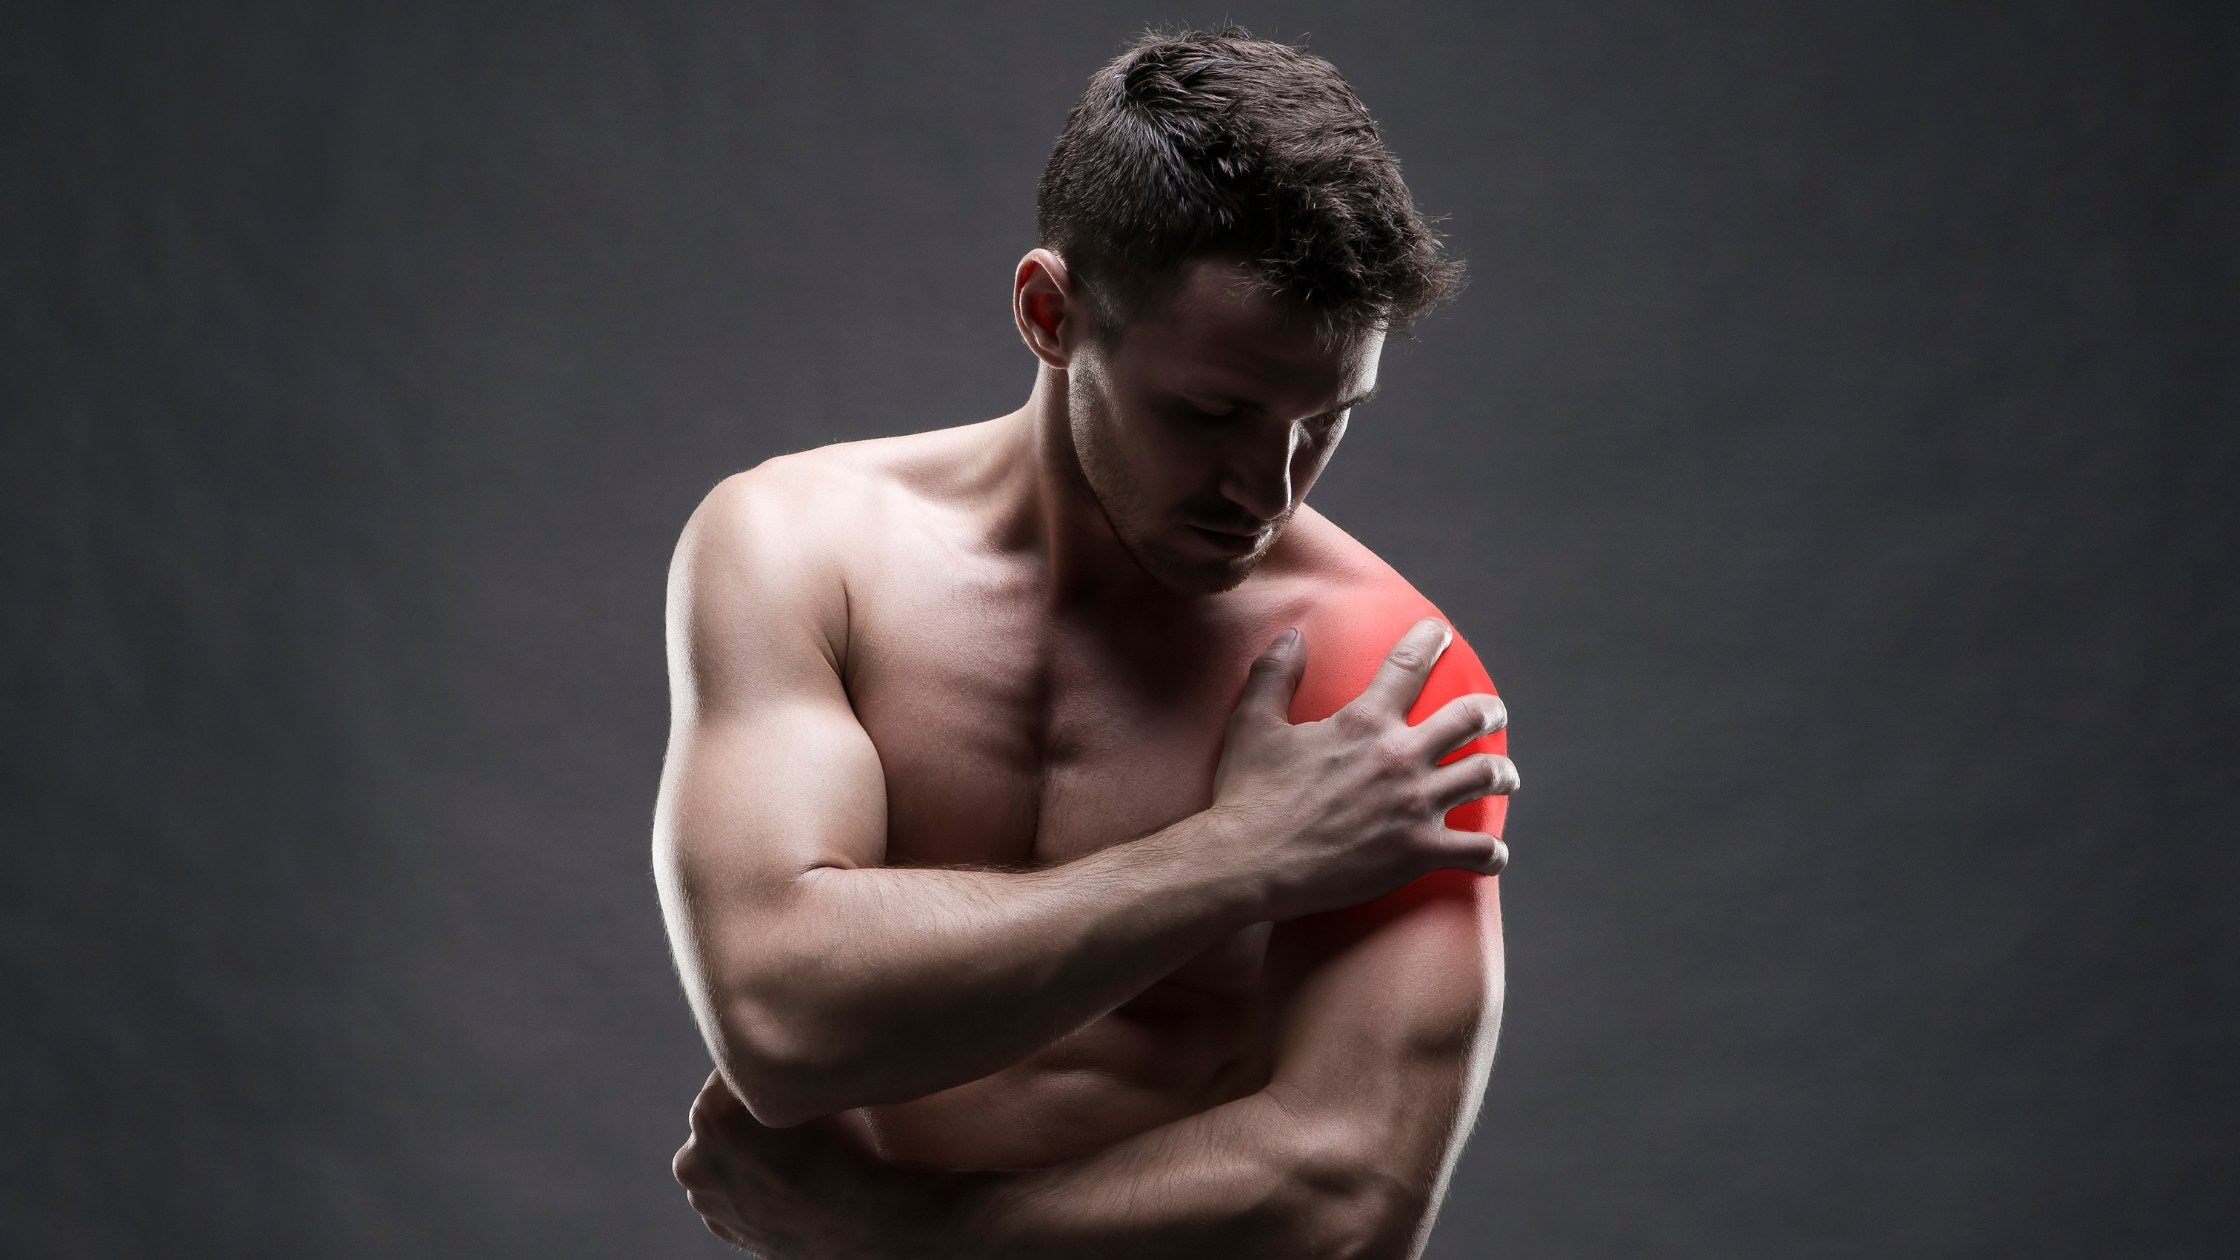 Home Therapy For Shoulder Pain